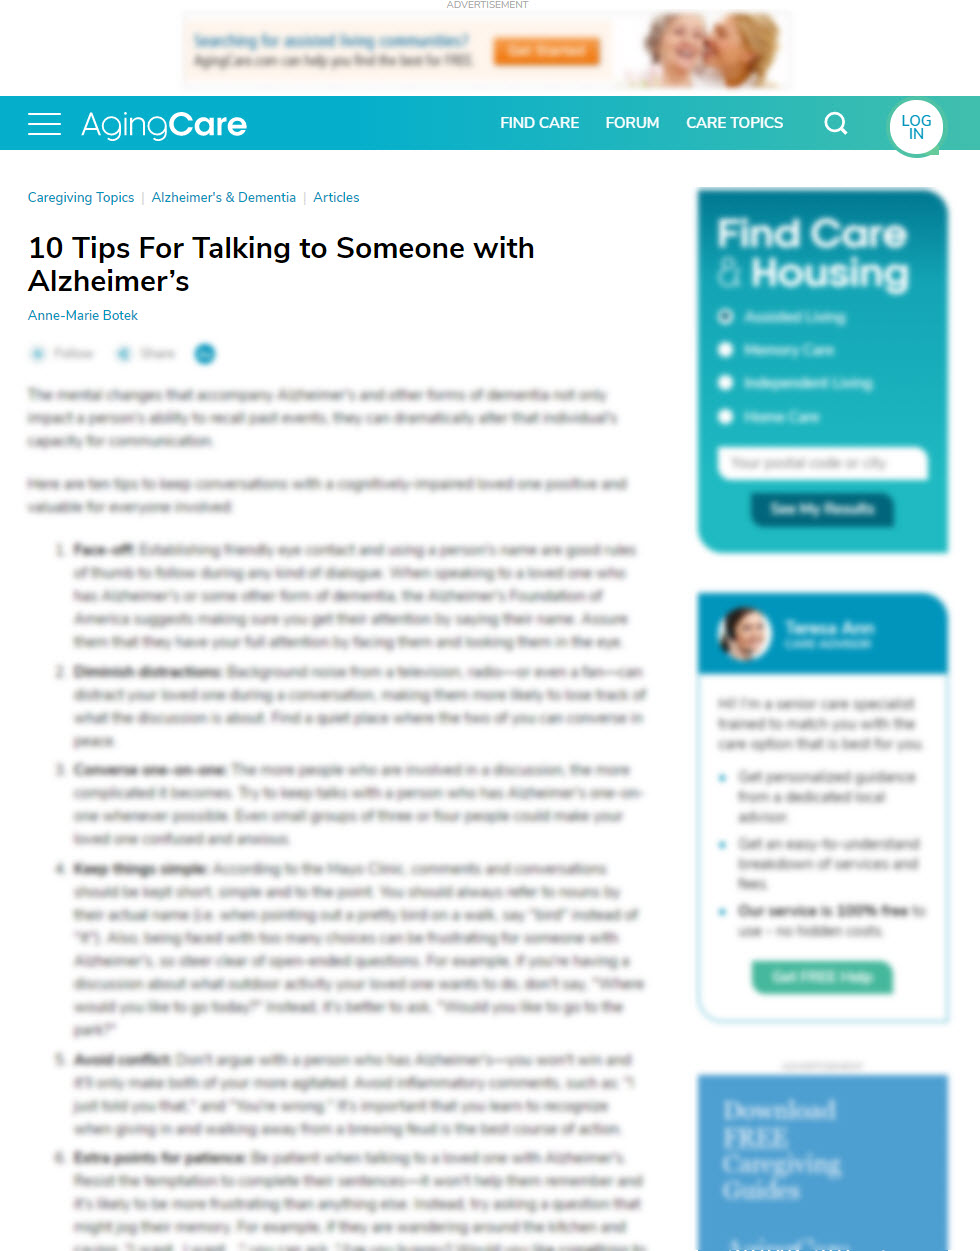 10 Tips For Talking to Someone with Alzheimer’s